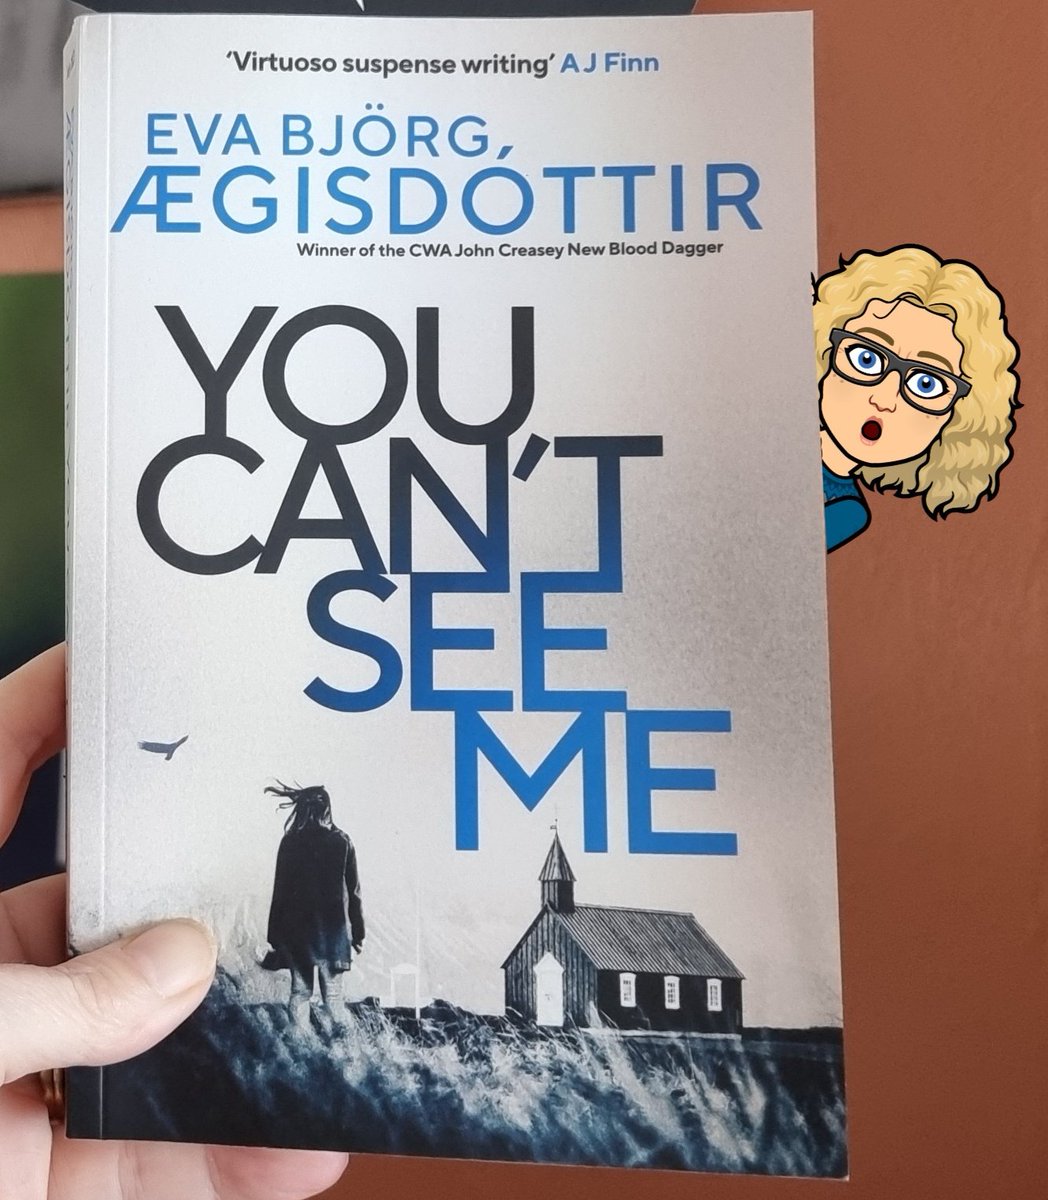 Oh boy, @OrendaBooks has done it again! Never was a title so apt, or the advice on the back (DON'T. TRUST. ANYONE) more wise! Eva Björg goes from strength to strength in this FANTASTIC 5🌟 #ForbiddenIceland prequel, a tense family reunion unravels - PREORDER NOW and roll on July!